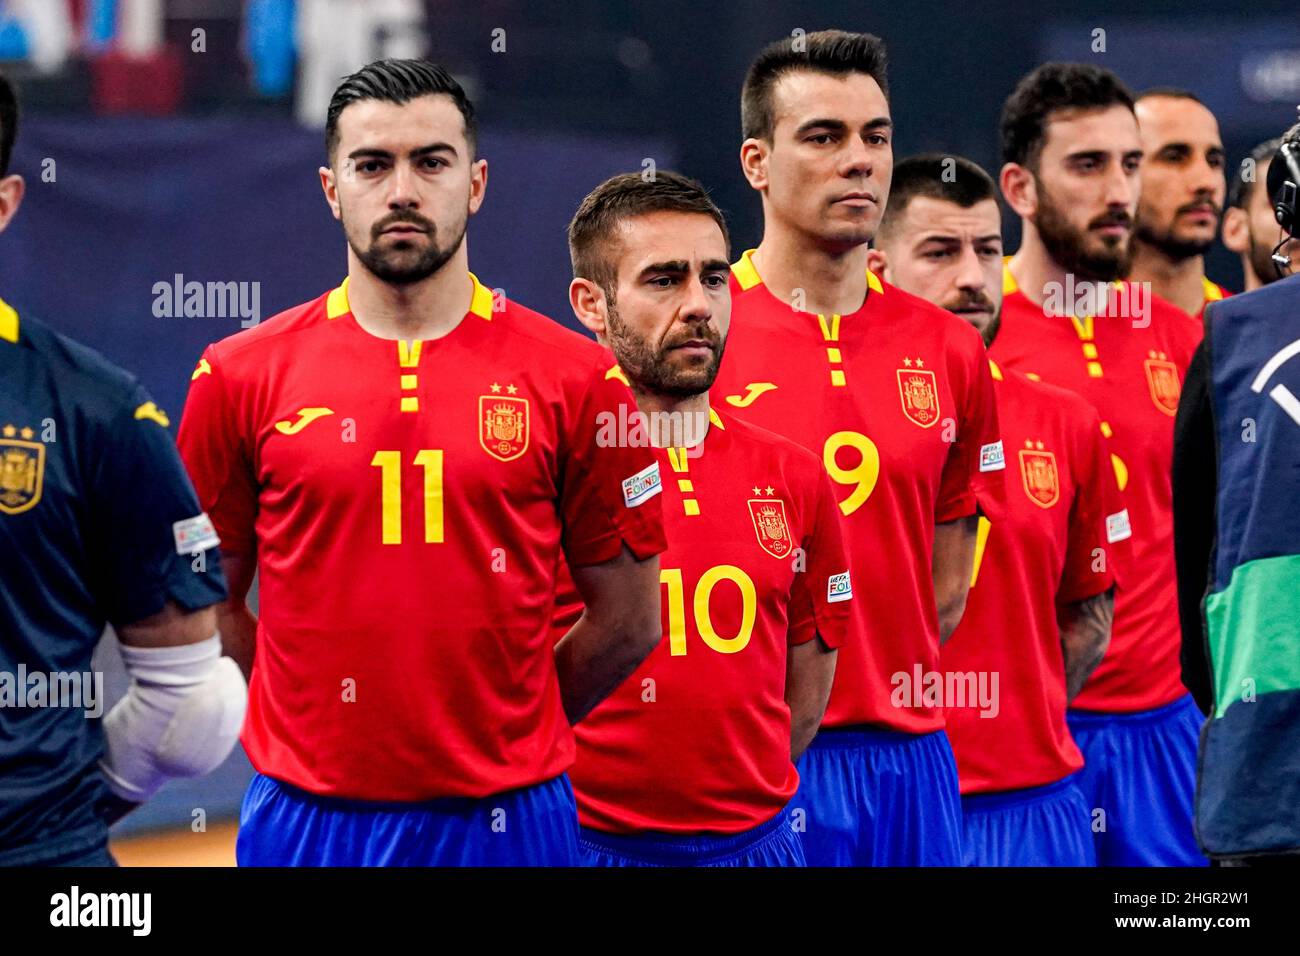 GRONINGEN, NETHERLANDS - JANUARY 22: Team Spain, Chino of Spain, Cecilio Morales of Spain, Sergio Lozano of Spain during the Men's Futsal Euro 2022 Group D match between Spain and the Bosnia and Herzegovina at the Martiniplaza on January 22, 2022 in Groningen, Netherlands (Photo by Andre Weening/Orange Pictures) Stock Photo